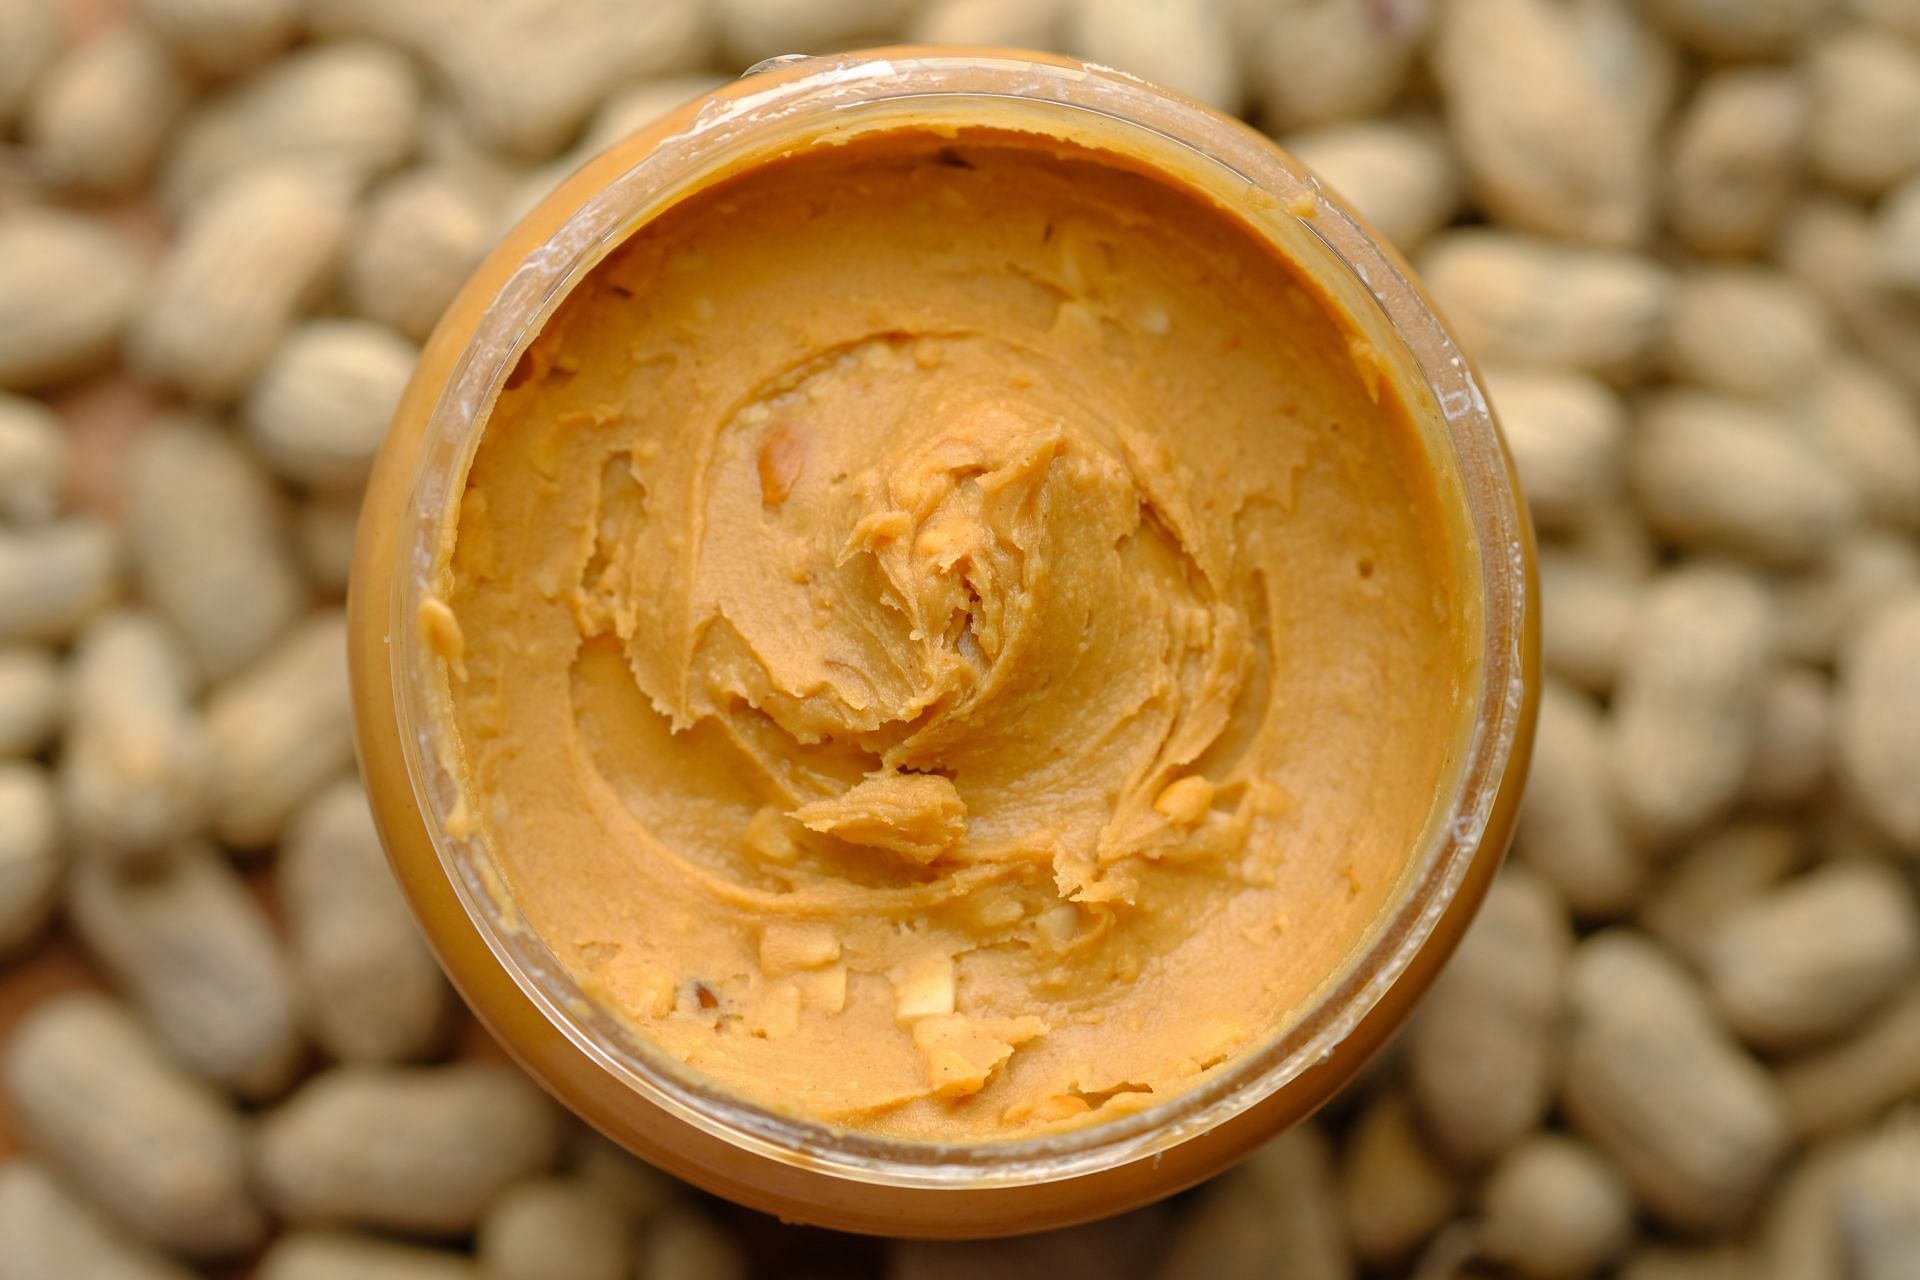 Peanut Butter Nutrition Facts and Health Benefits